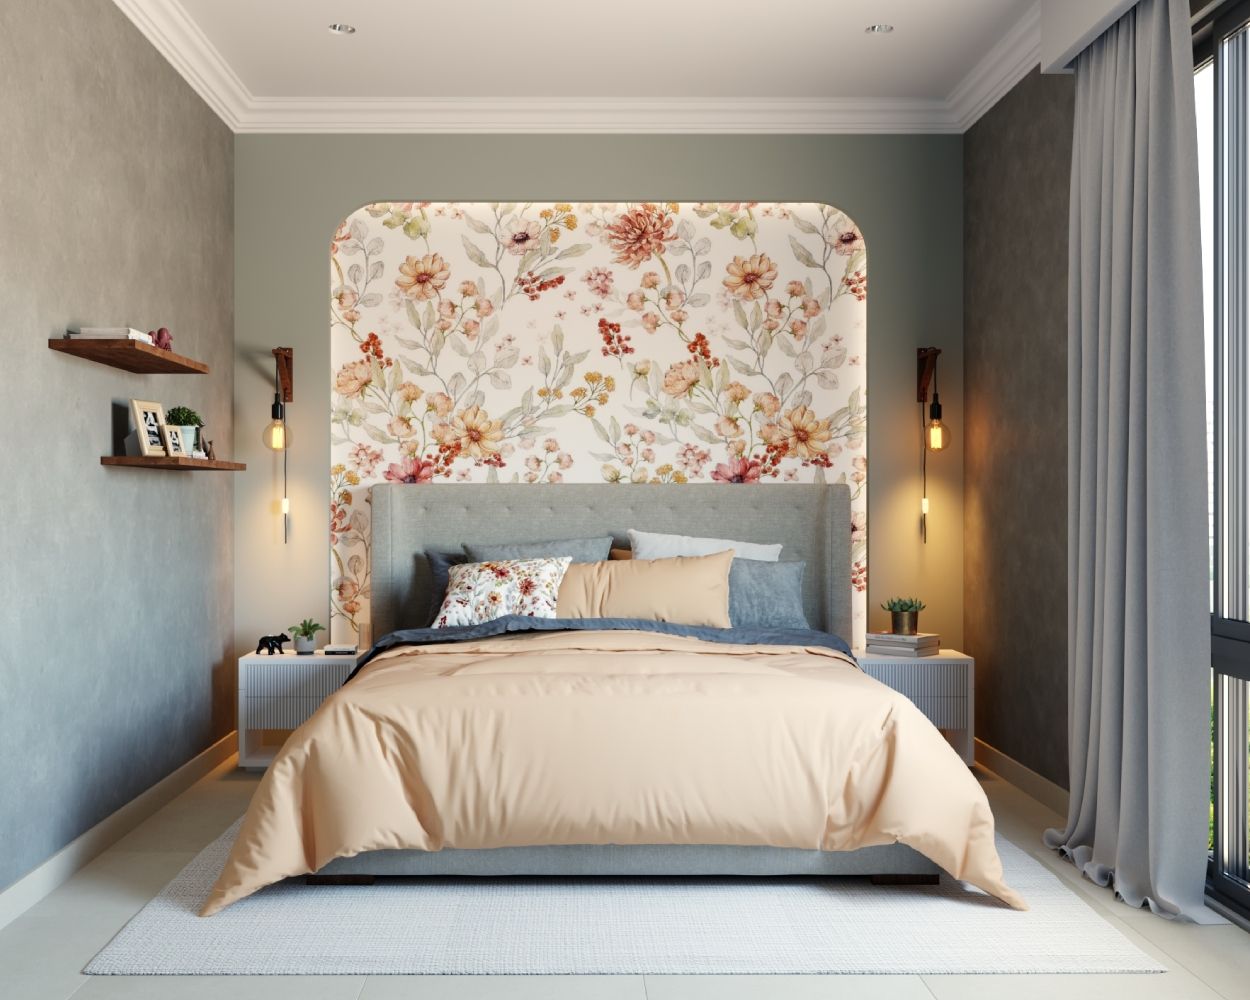 Contemporary Multicoloured Bedroom Wall Design With Wallpaper And Panel